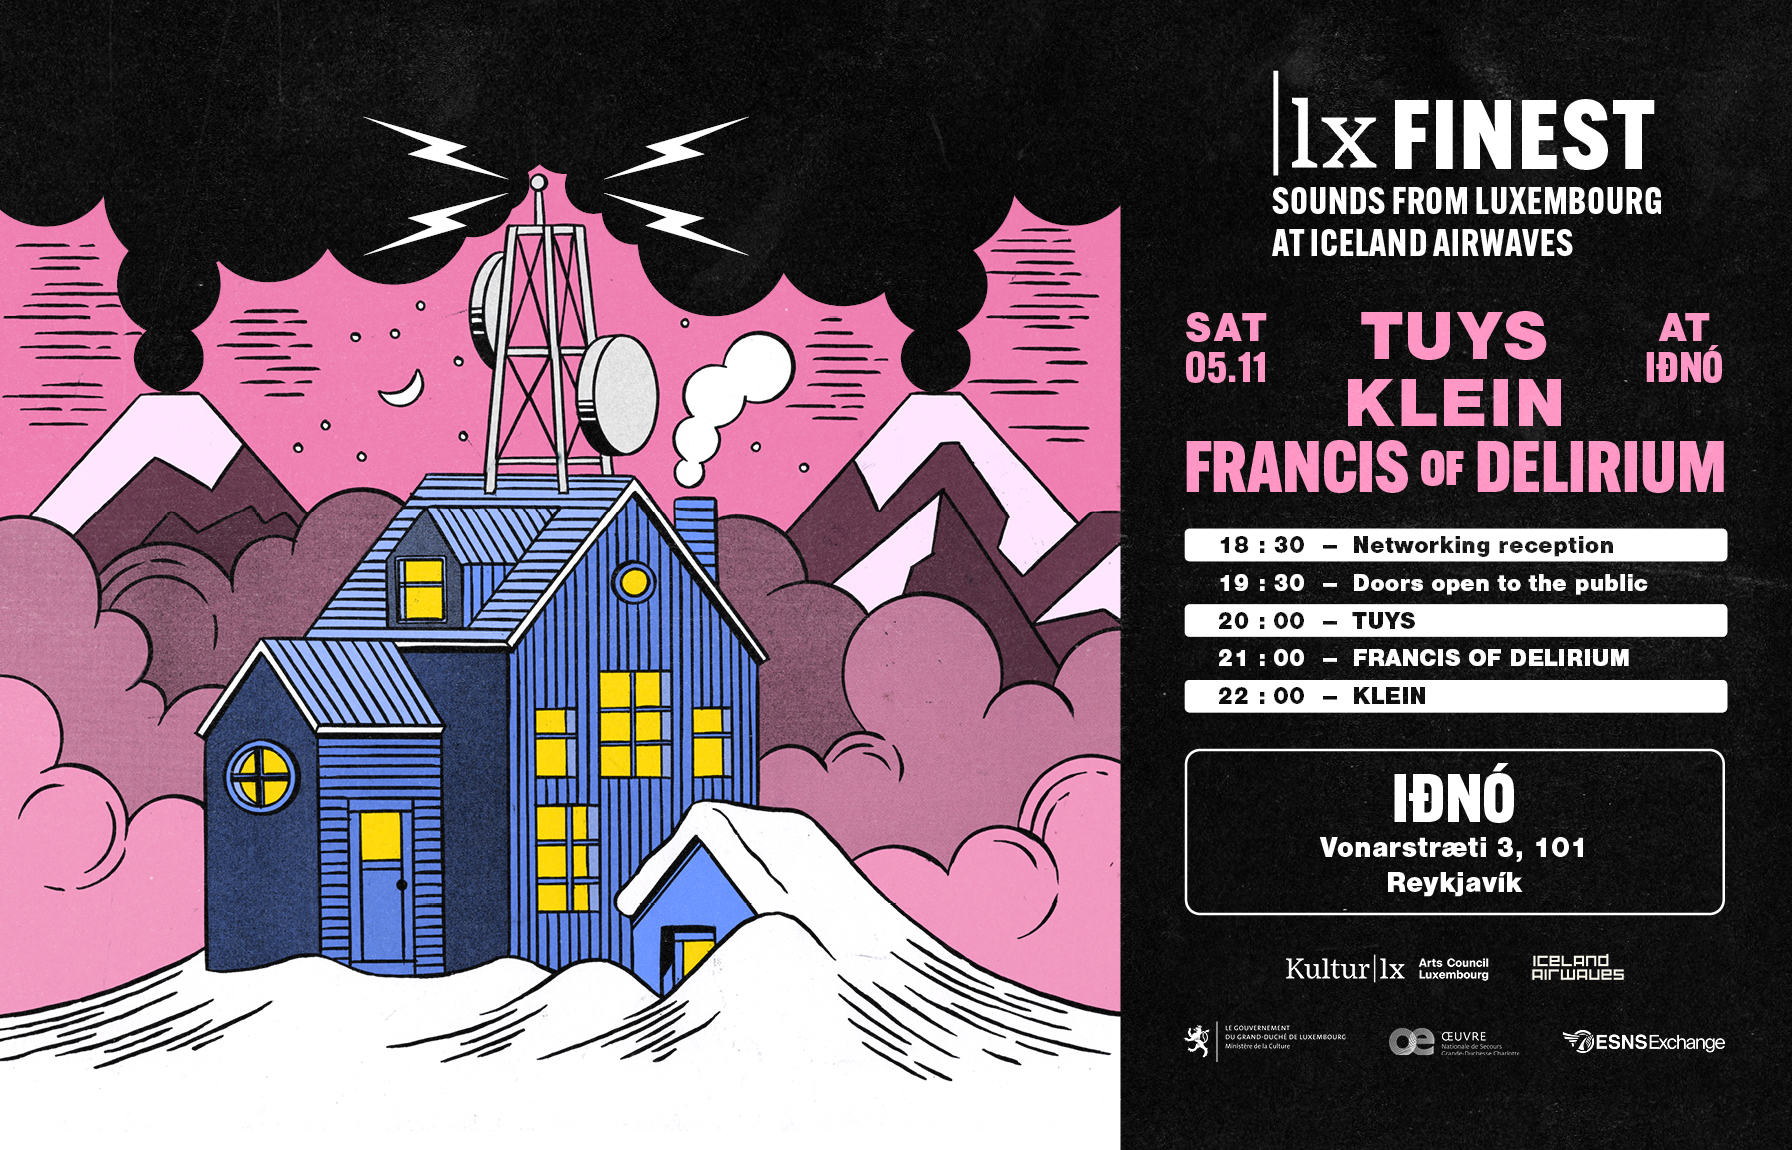 |lx finest - Sounds from Luxembourg à Iceland Airwaves 2022